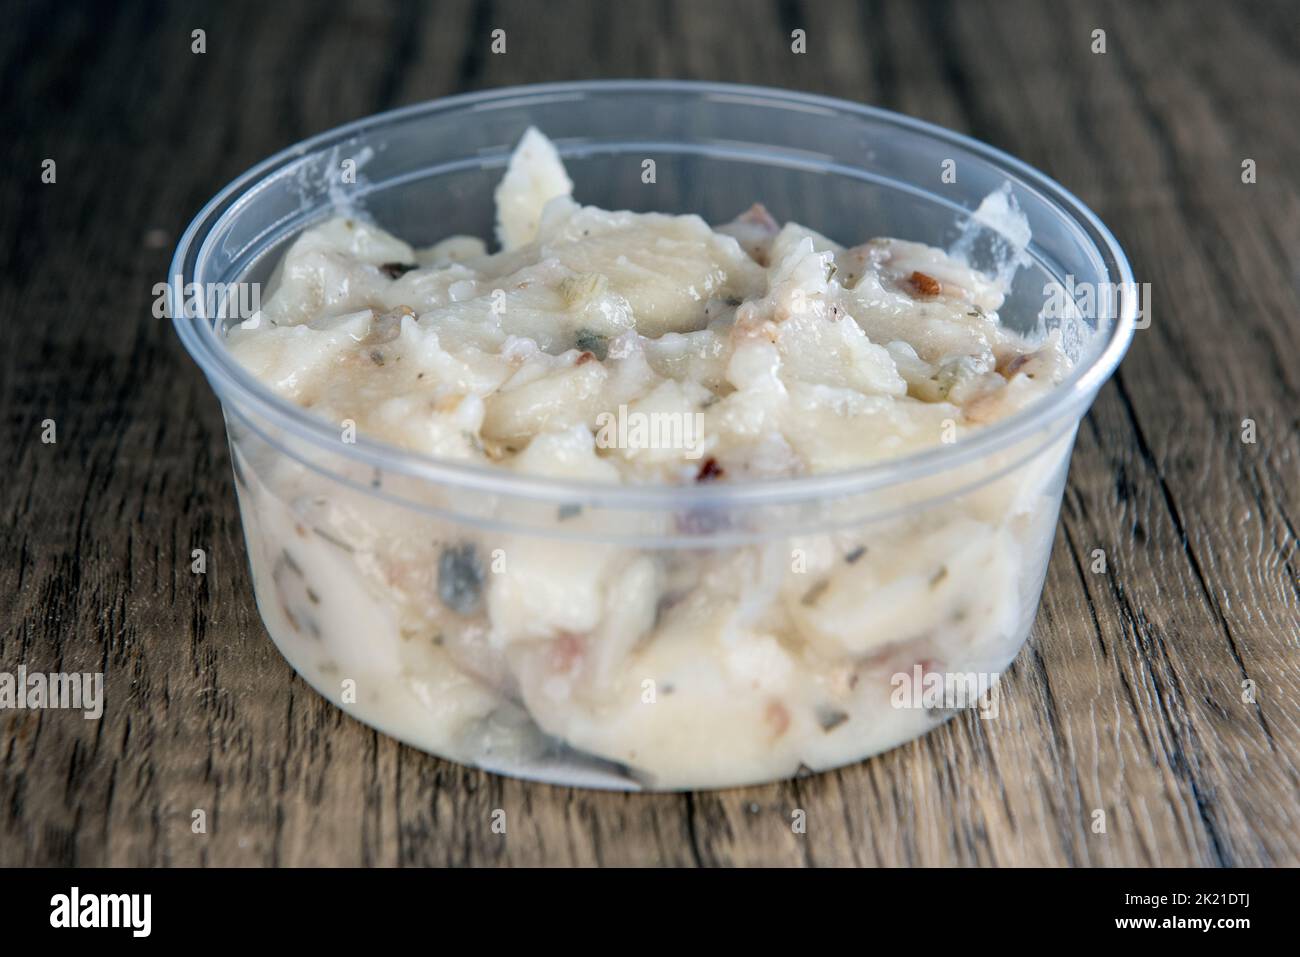 Lunch is complimented with a side order of  potato salad in a resuable container. Stock Photo